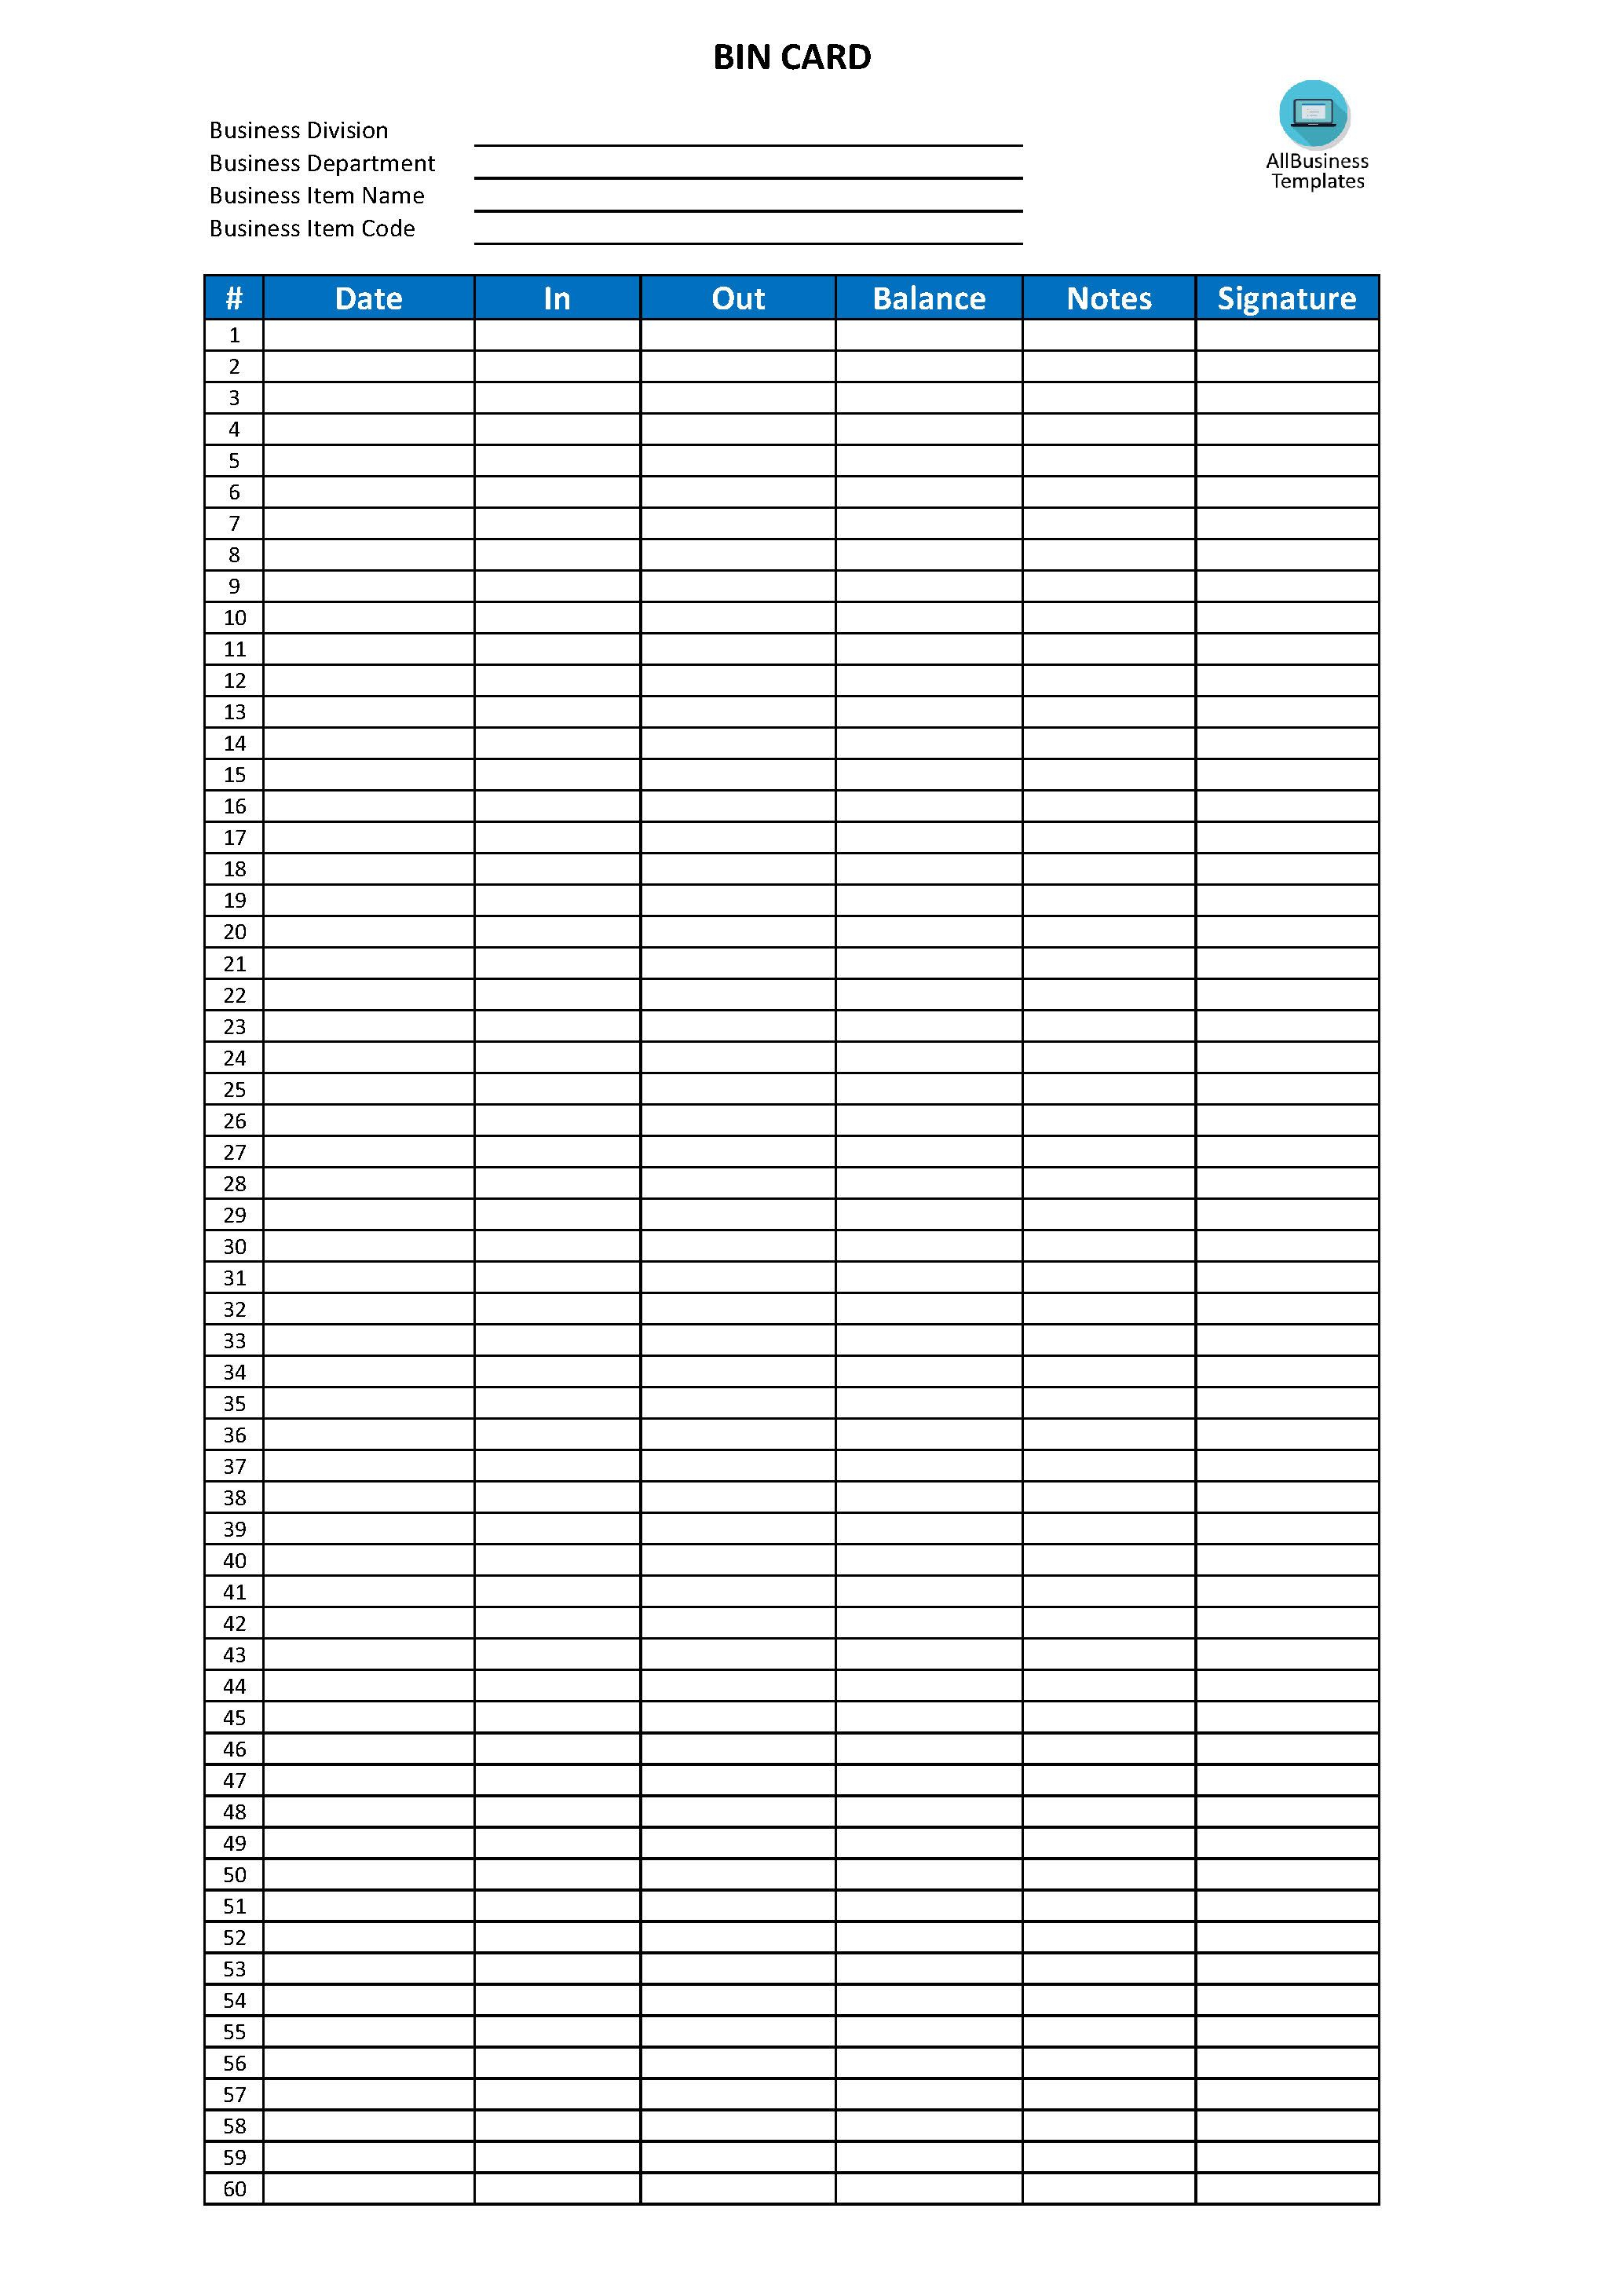 Bin Card Format Excel - Are You Managing A Store And Like To In Bin Card Template